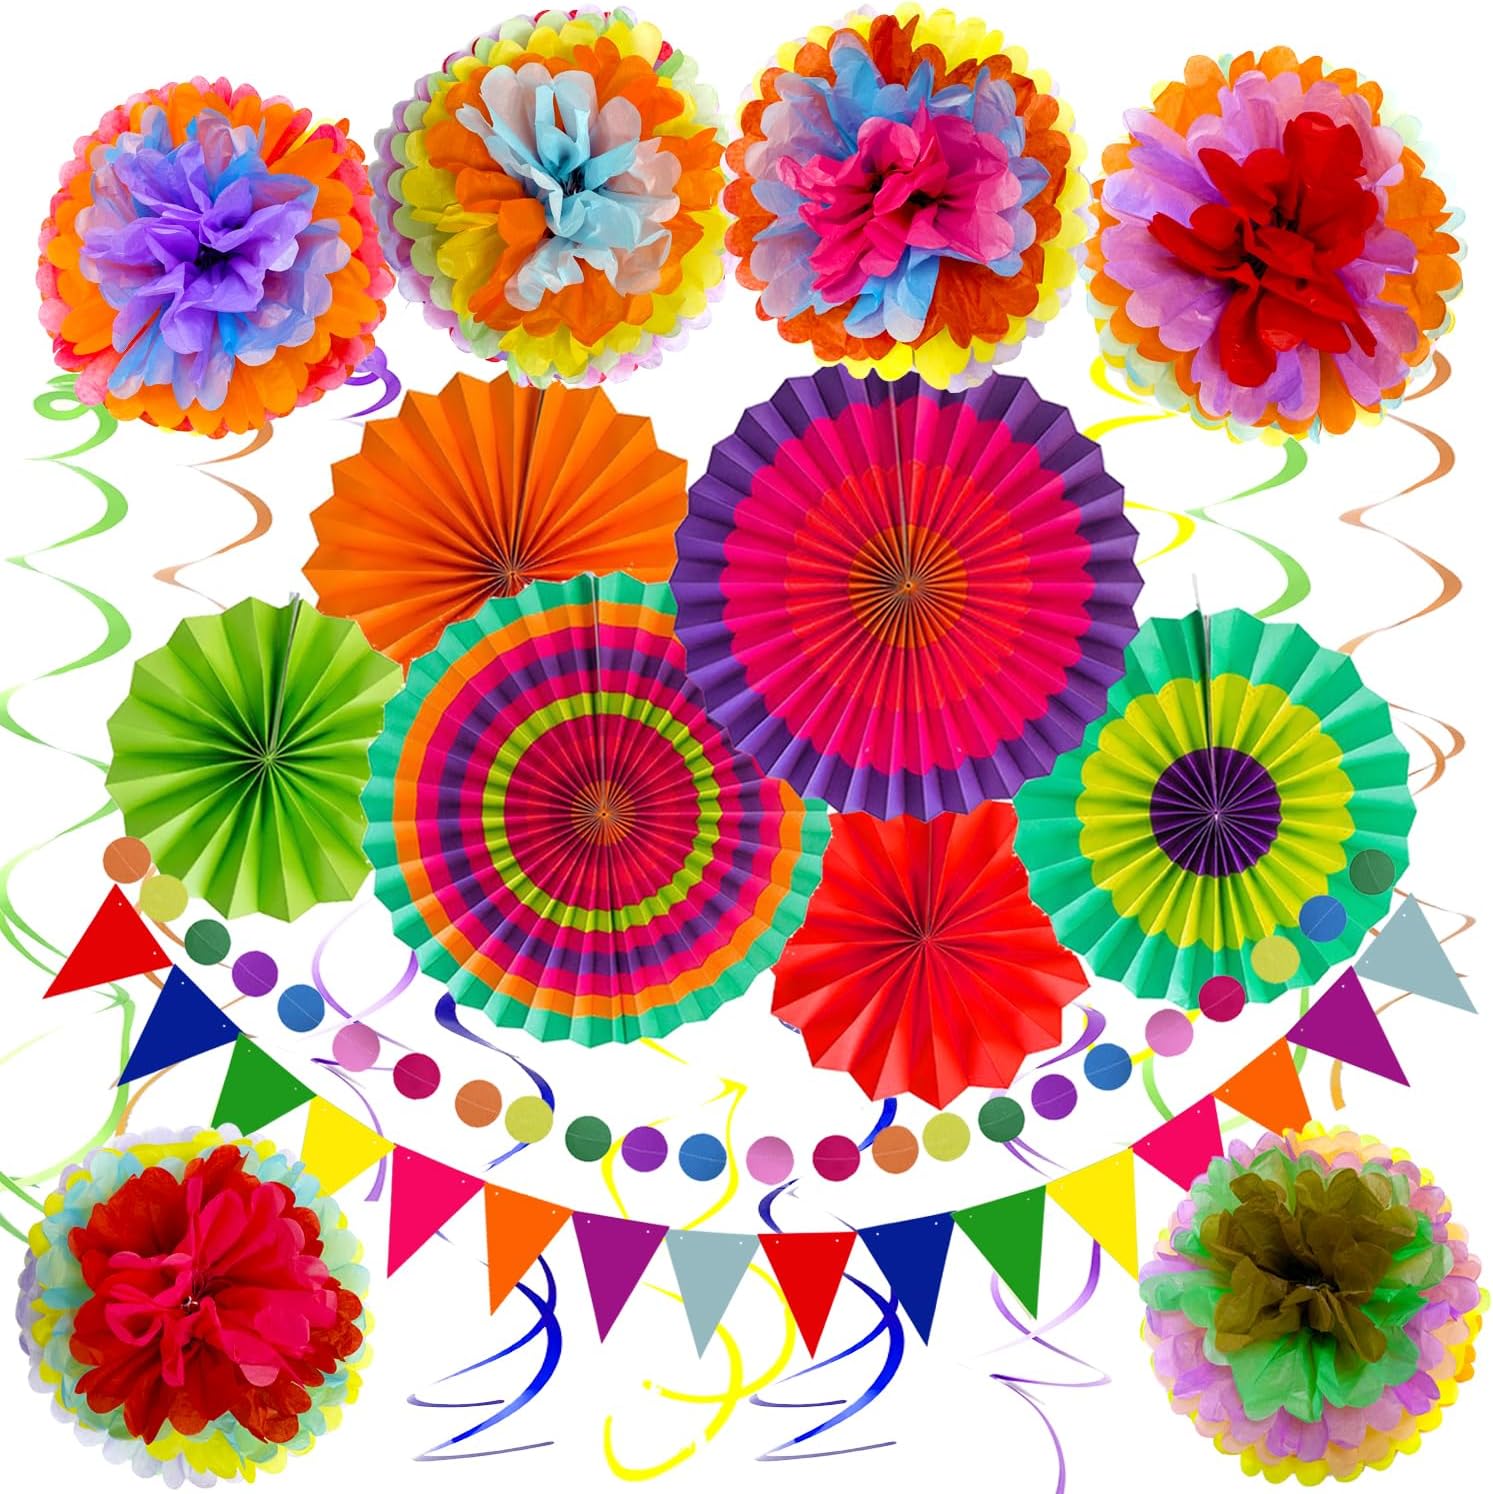 ZERODECO Multicolor Party Decorations, Fiesta Tissue Pompoms Paper Flowers with Paper Fans Garlands String and Triangle Bunting Banner Hanging Swirls for Cinco De Mayo Birthday Fiesta or Mexican Party